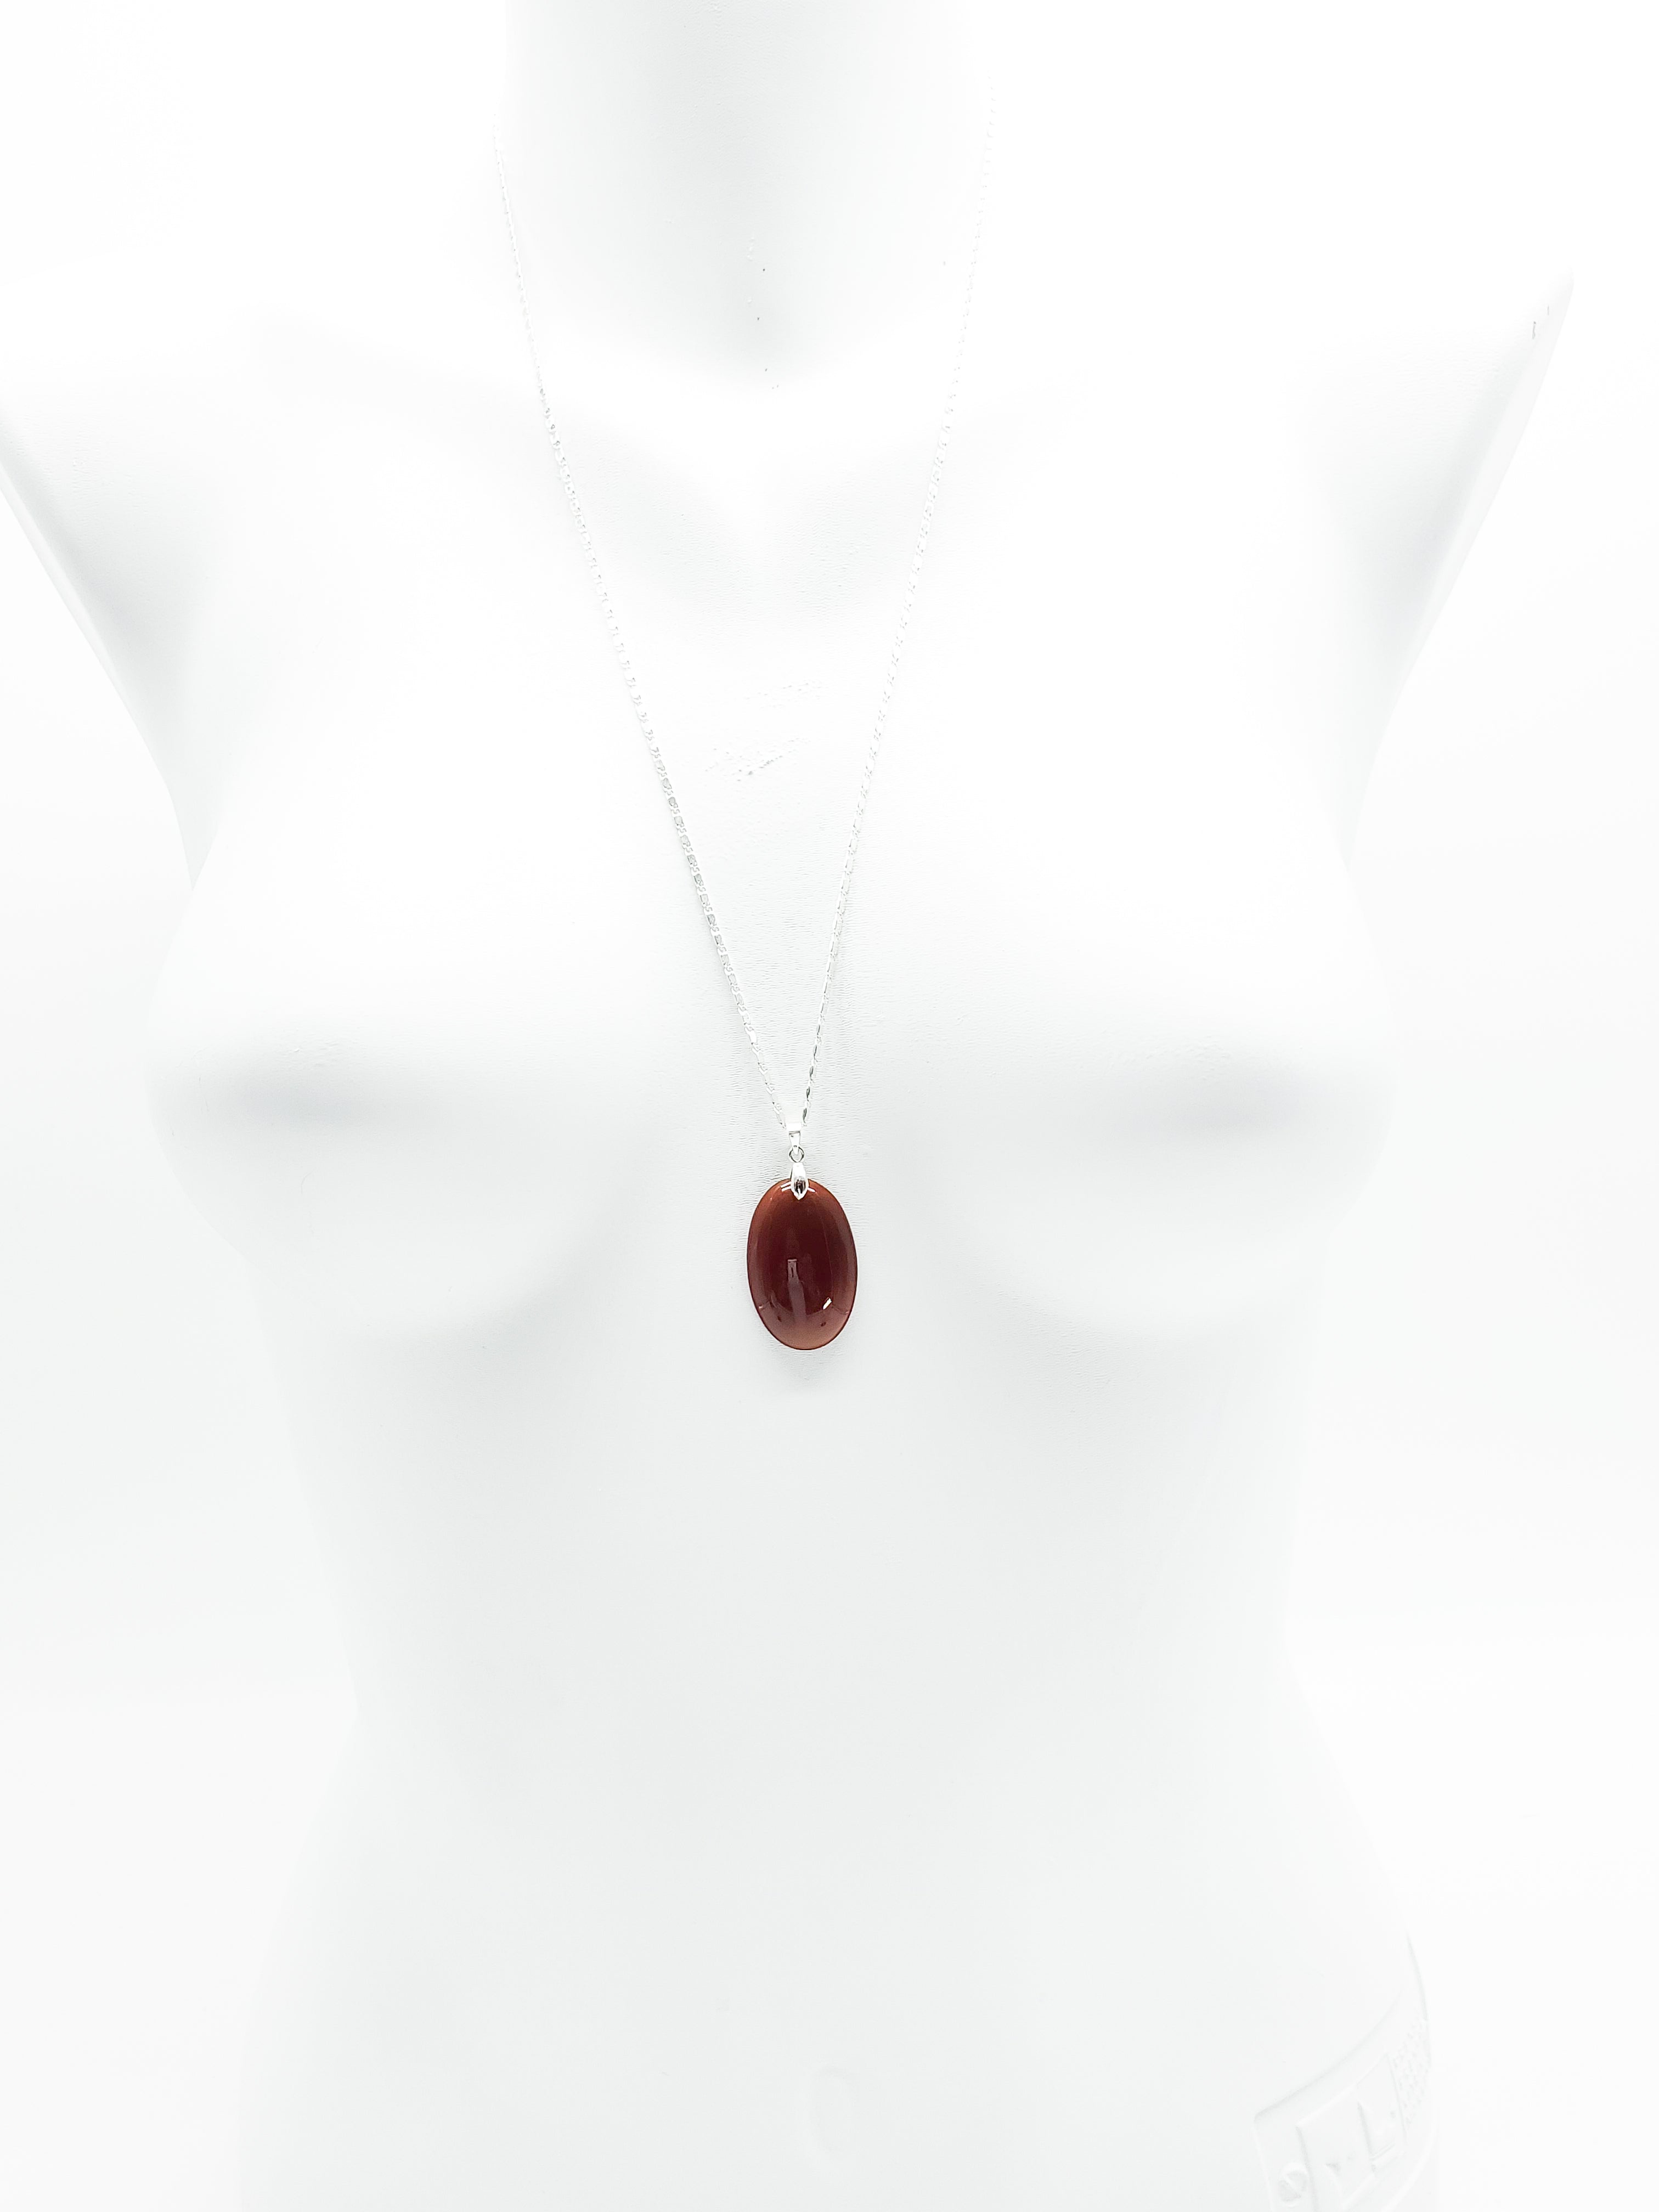 Oval Red Carnelian Necklace on Sterling Silver Flat S Chain - The Caffeinated Raven